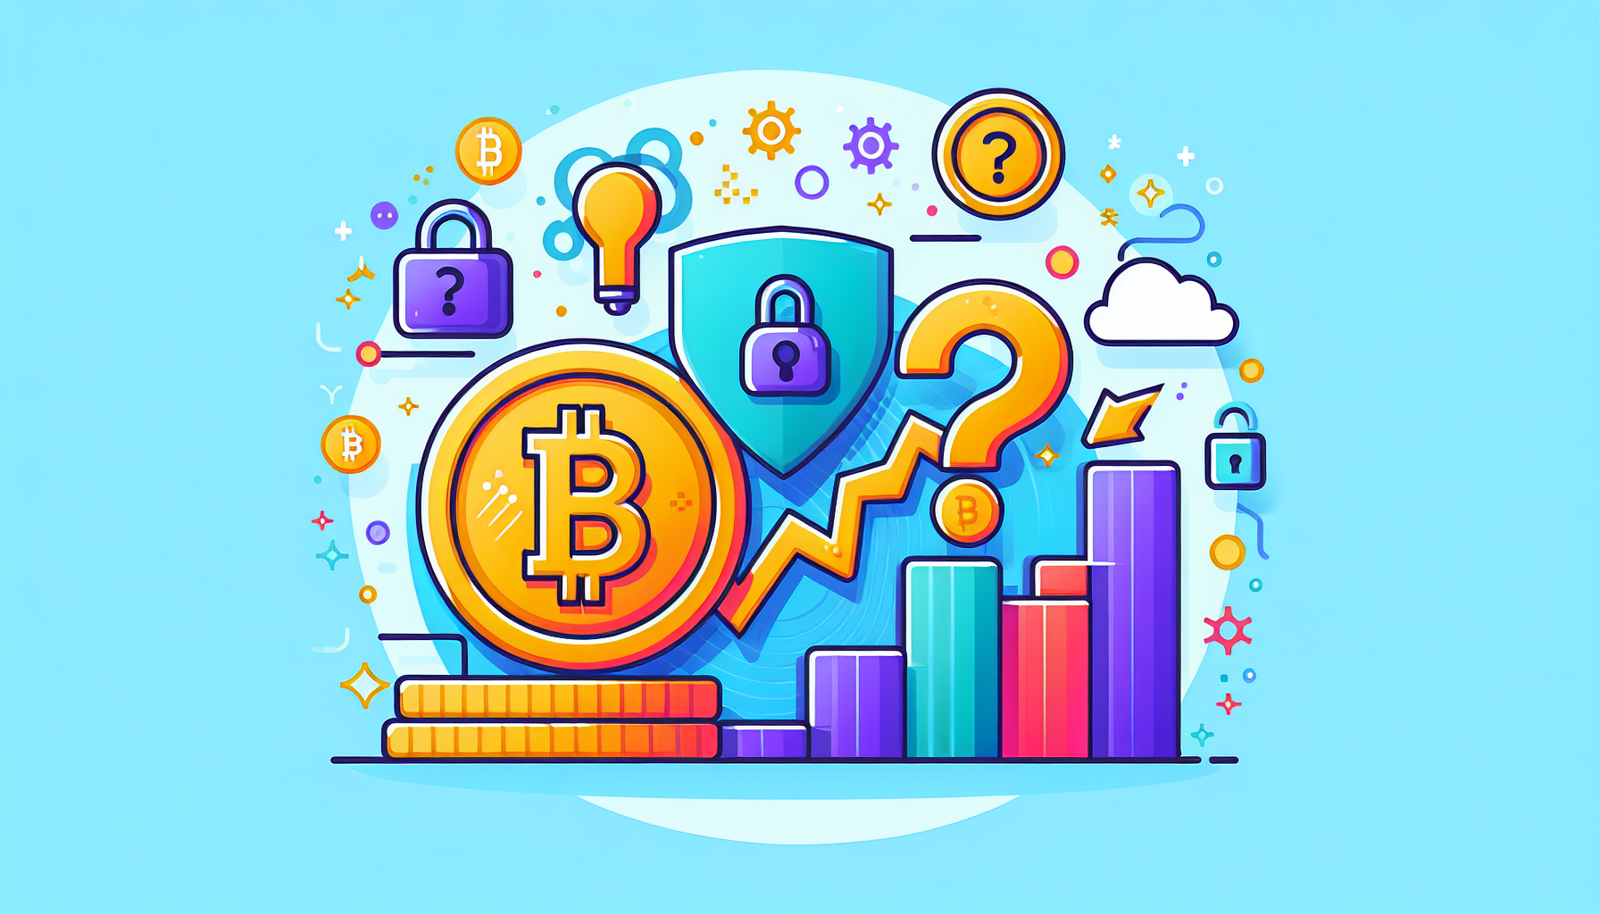 Create an illustration that visualizes some common concerns about accepting cryptocurrency payments, represented in a modern, colorful style. The image may include symbols like a stylized digital coin, a question mark to represent doubts, a lock symbolizing security issues, and a graph showcasing market volatility. To make it modern, use bright colors, and sleek, streamlined shapes.